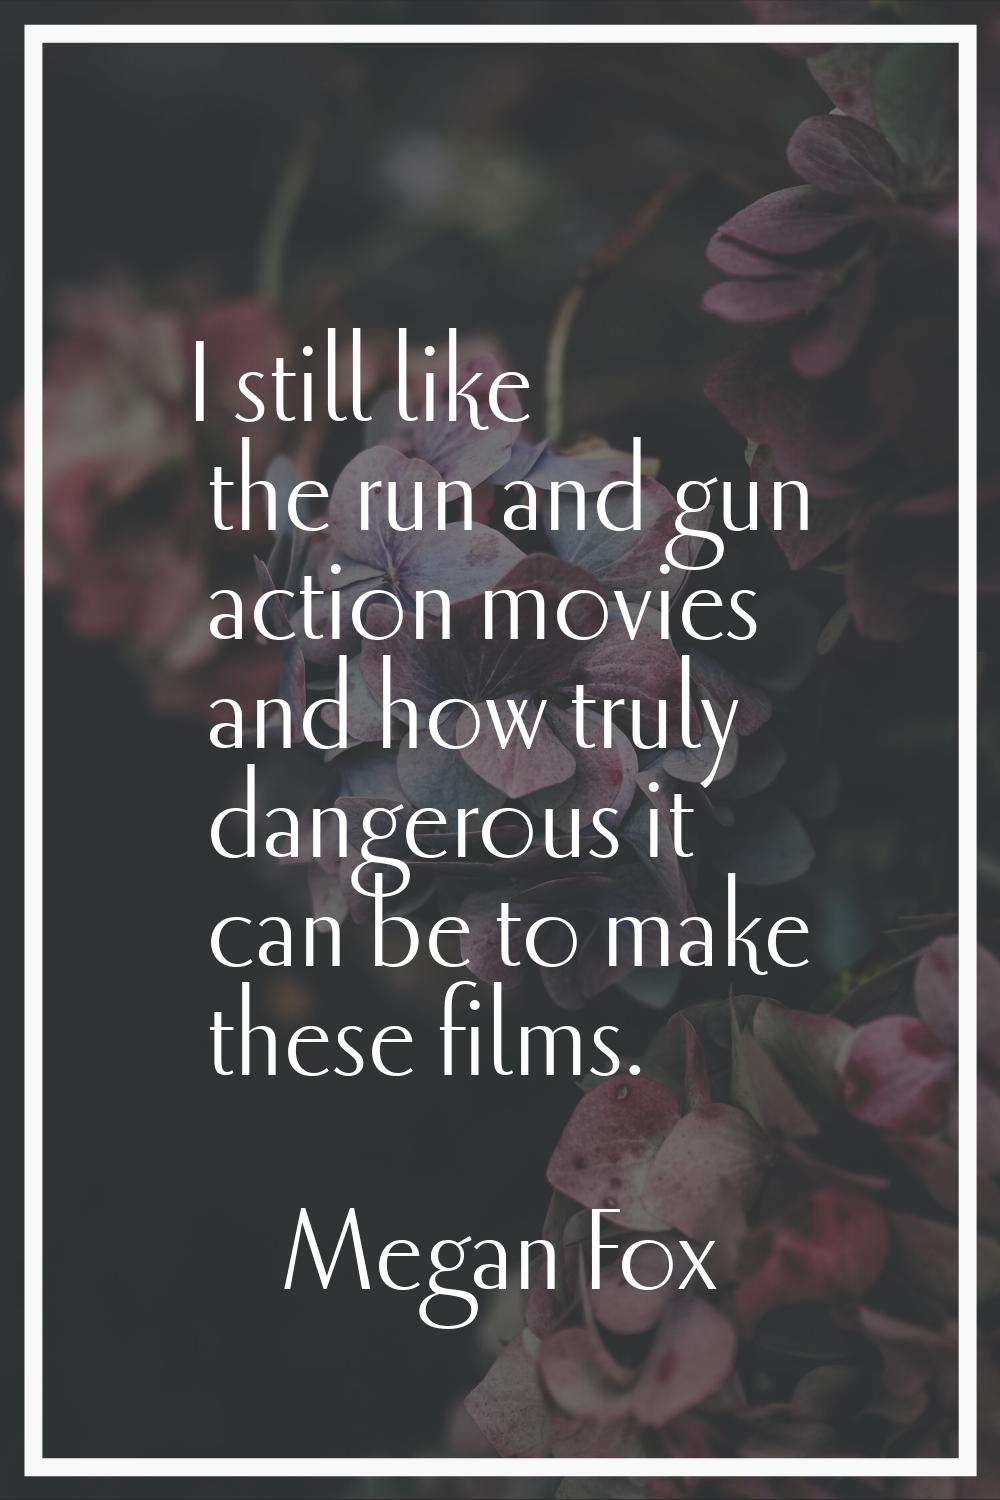 I still like the run and gun action movies and how truly dangerous it can be to make these films.